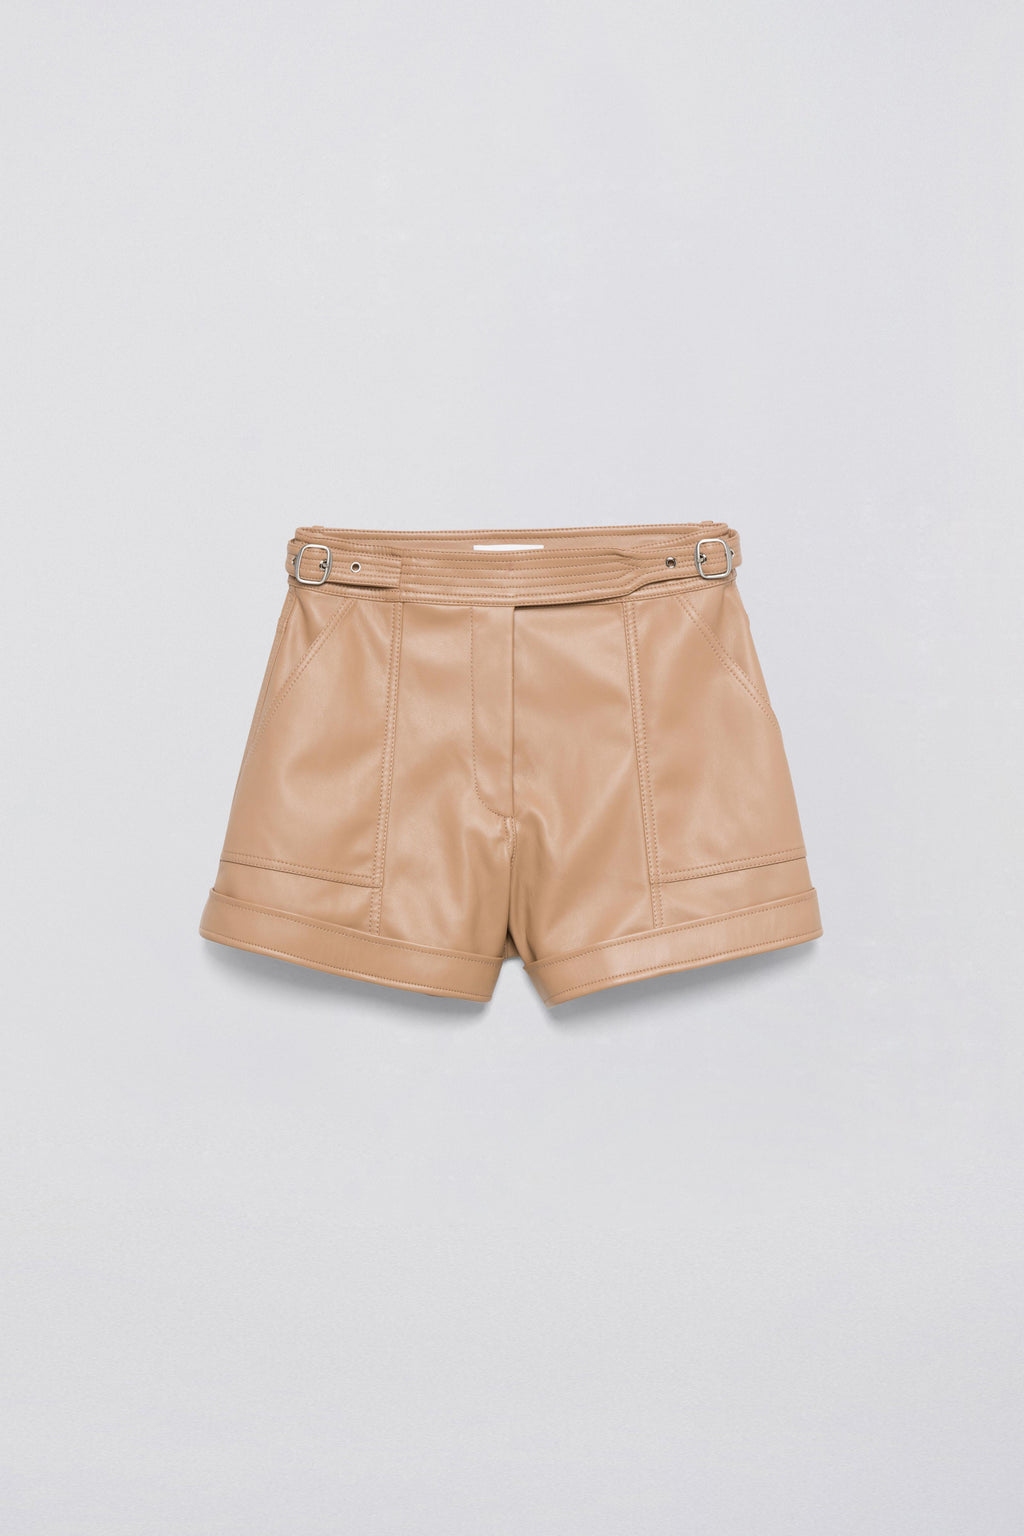 Chace Shorts